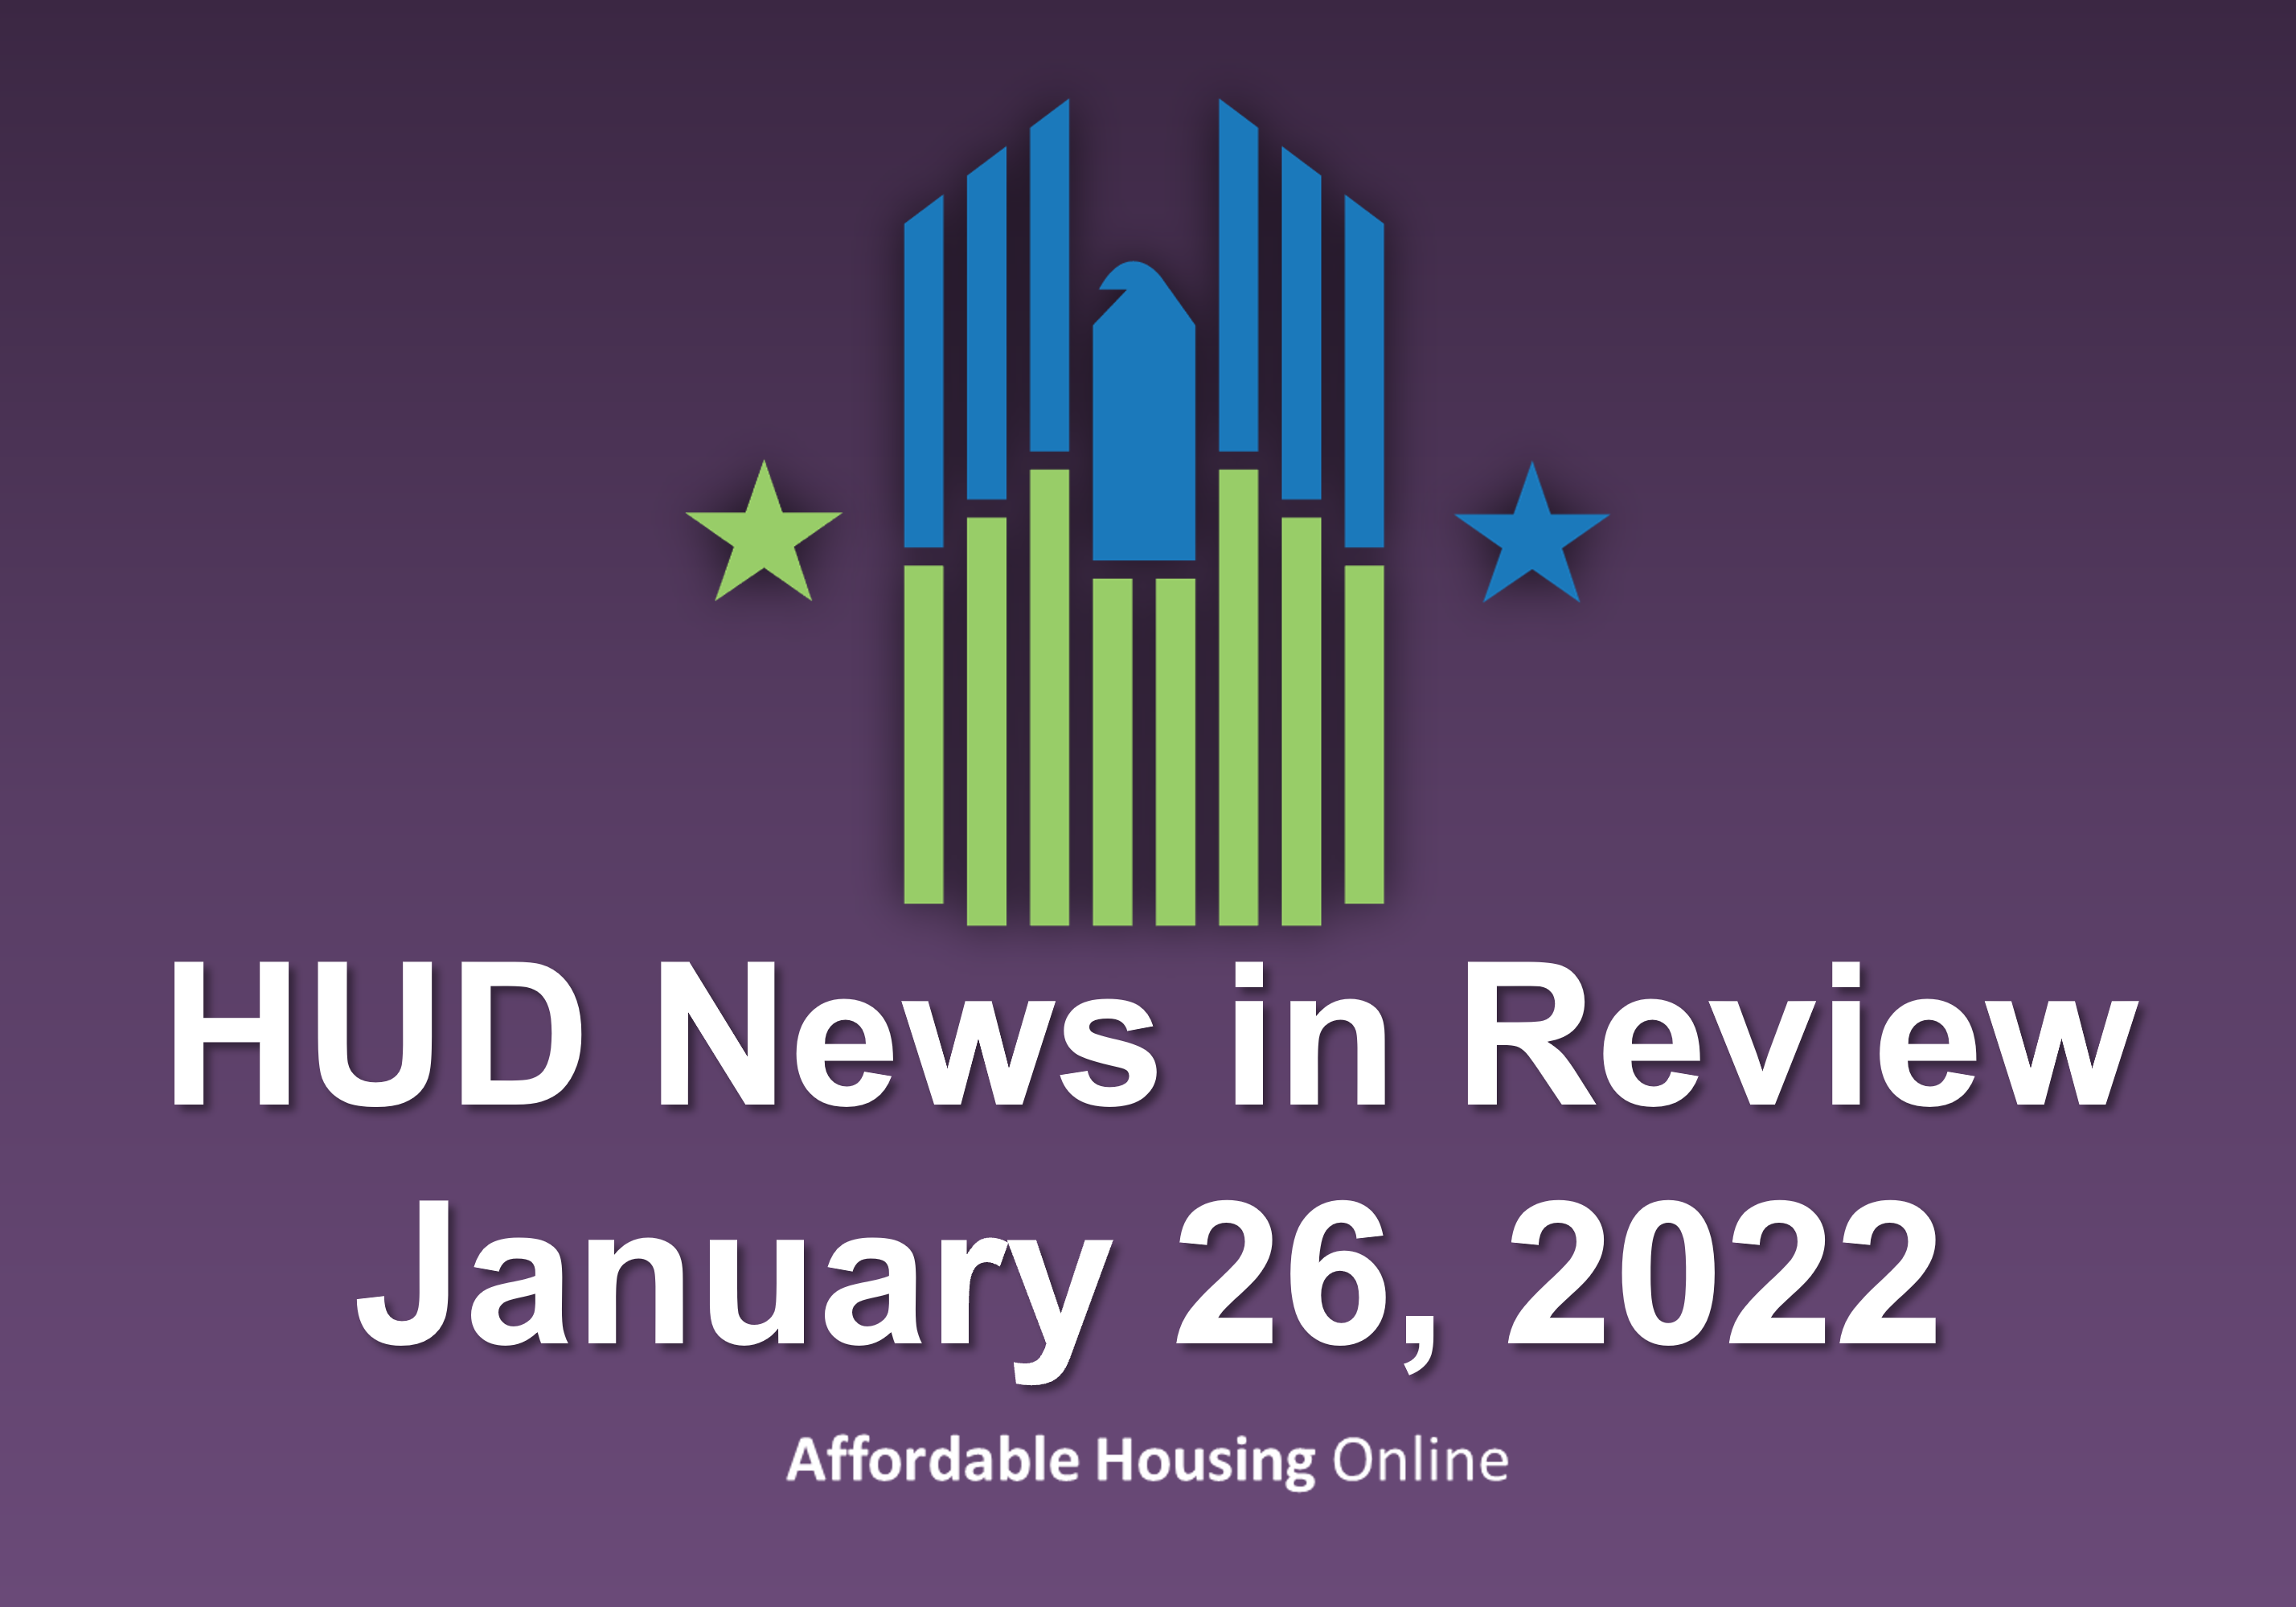 HUD News in Review: January 26, 2022